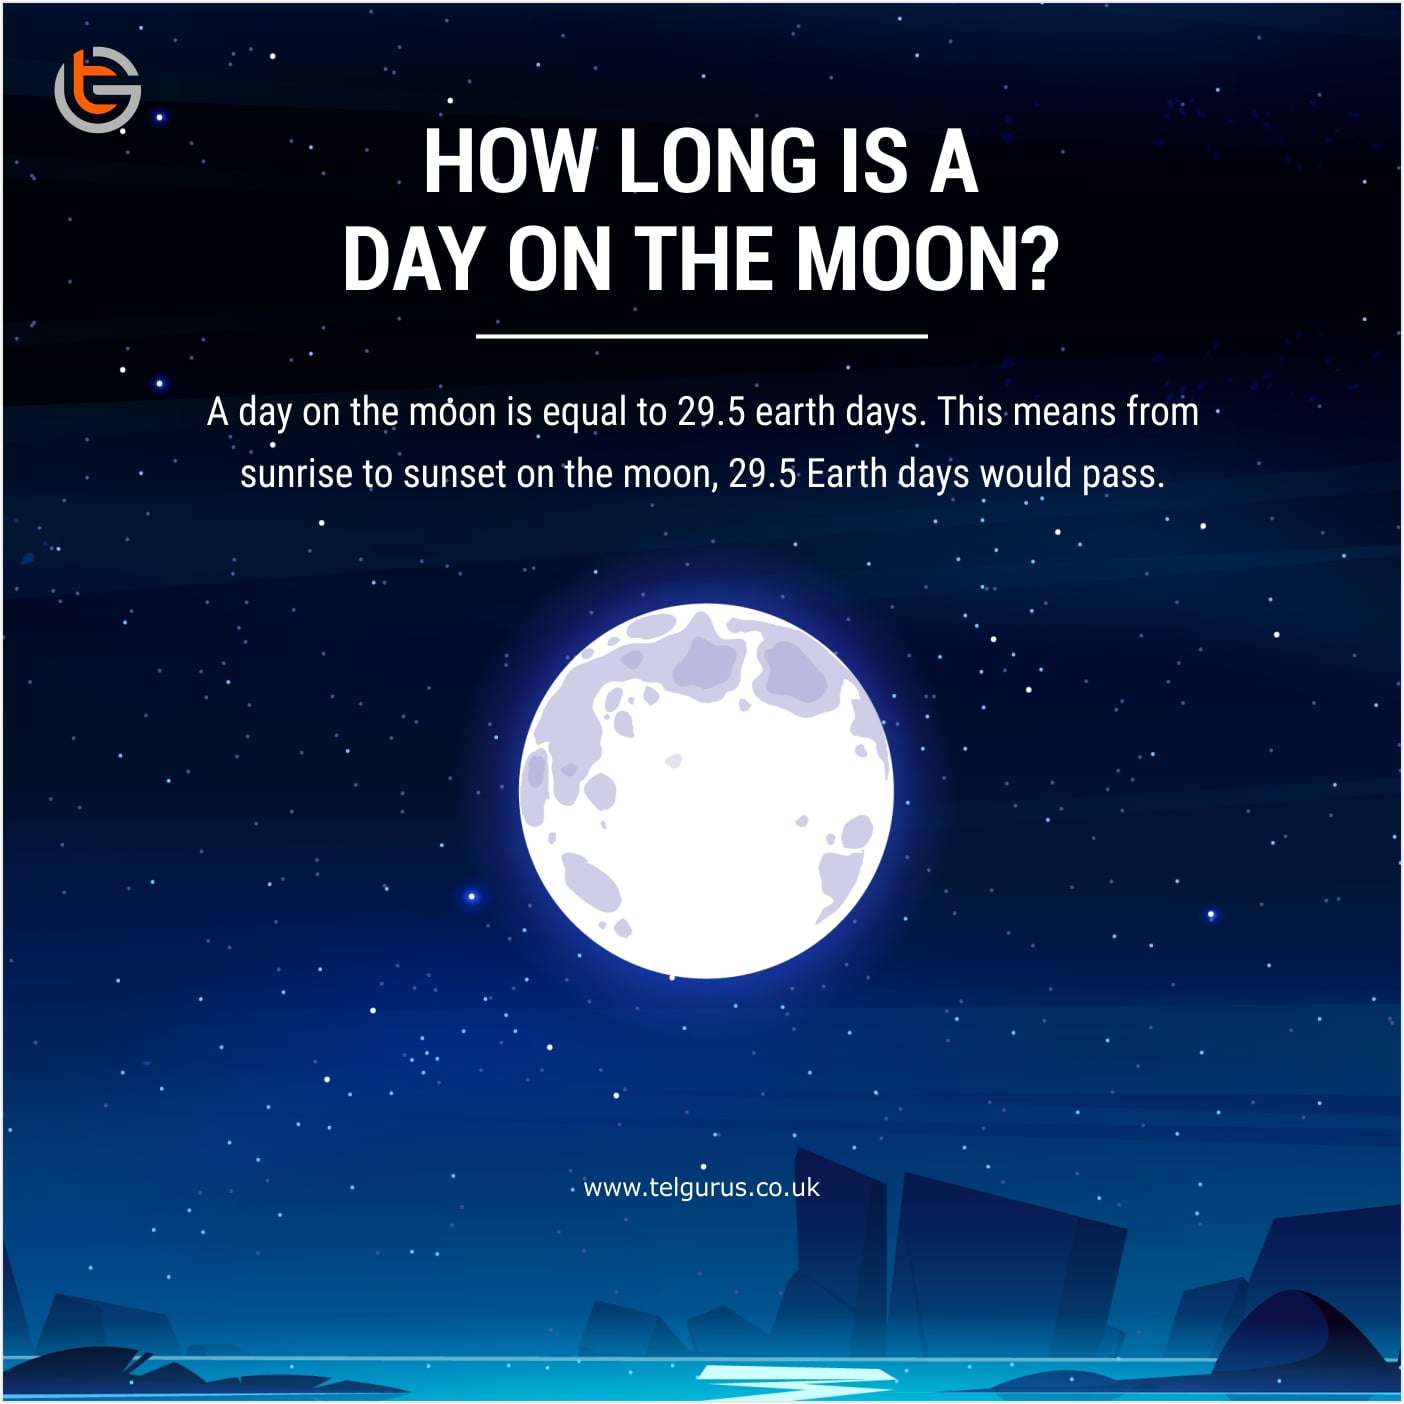 How log is a day on moon